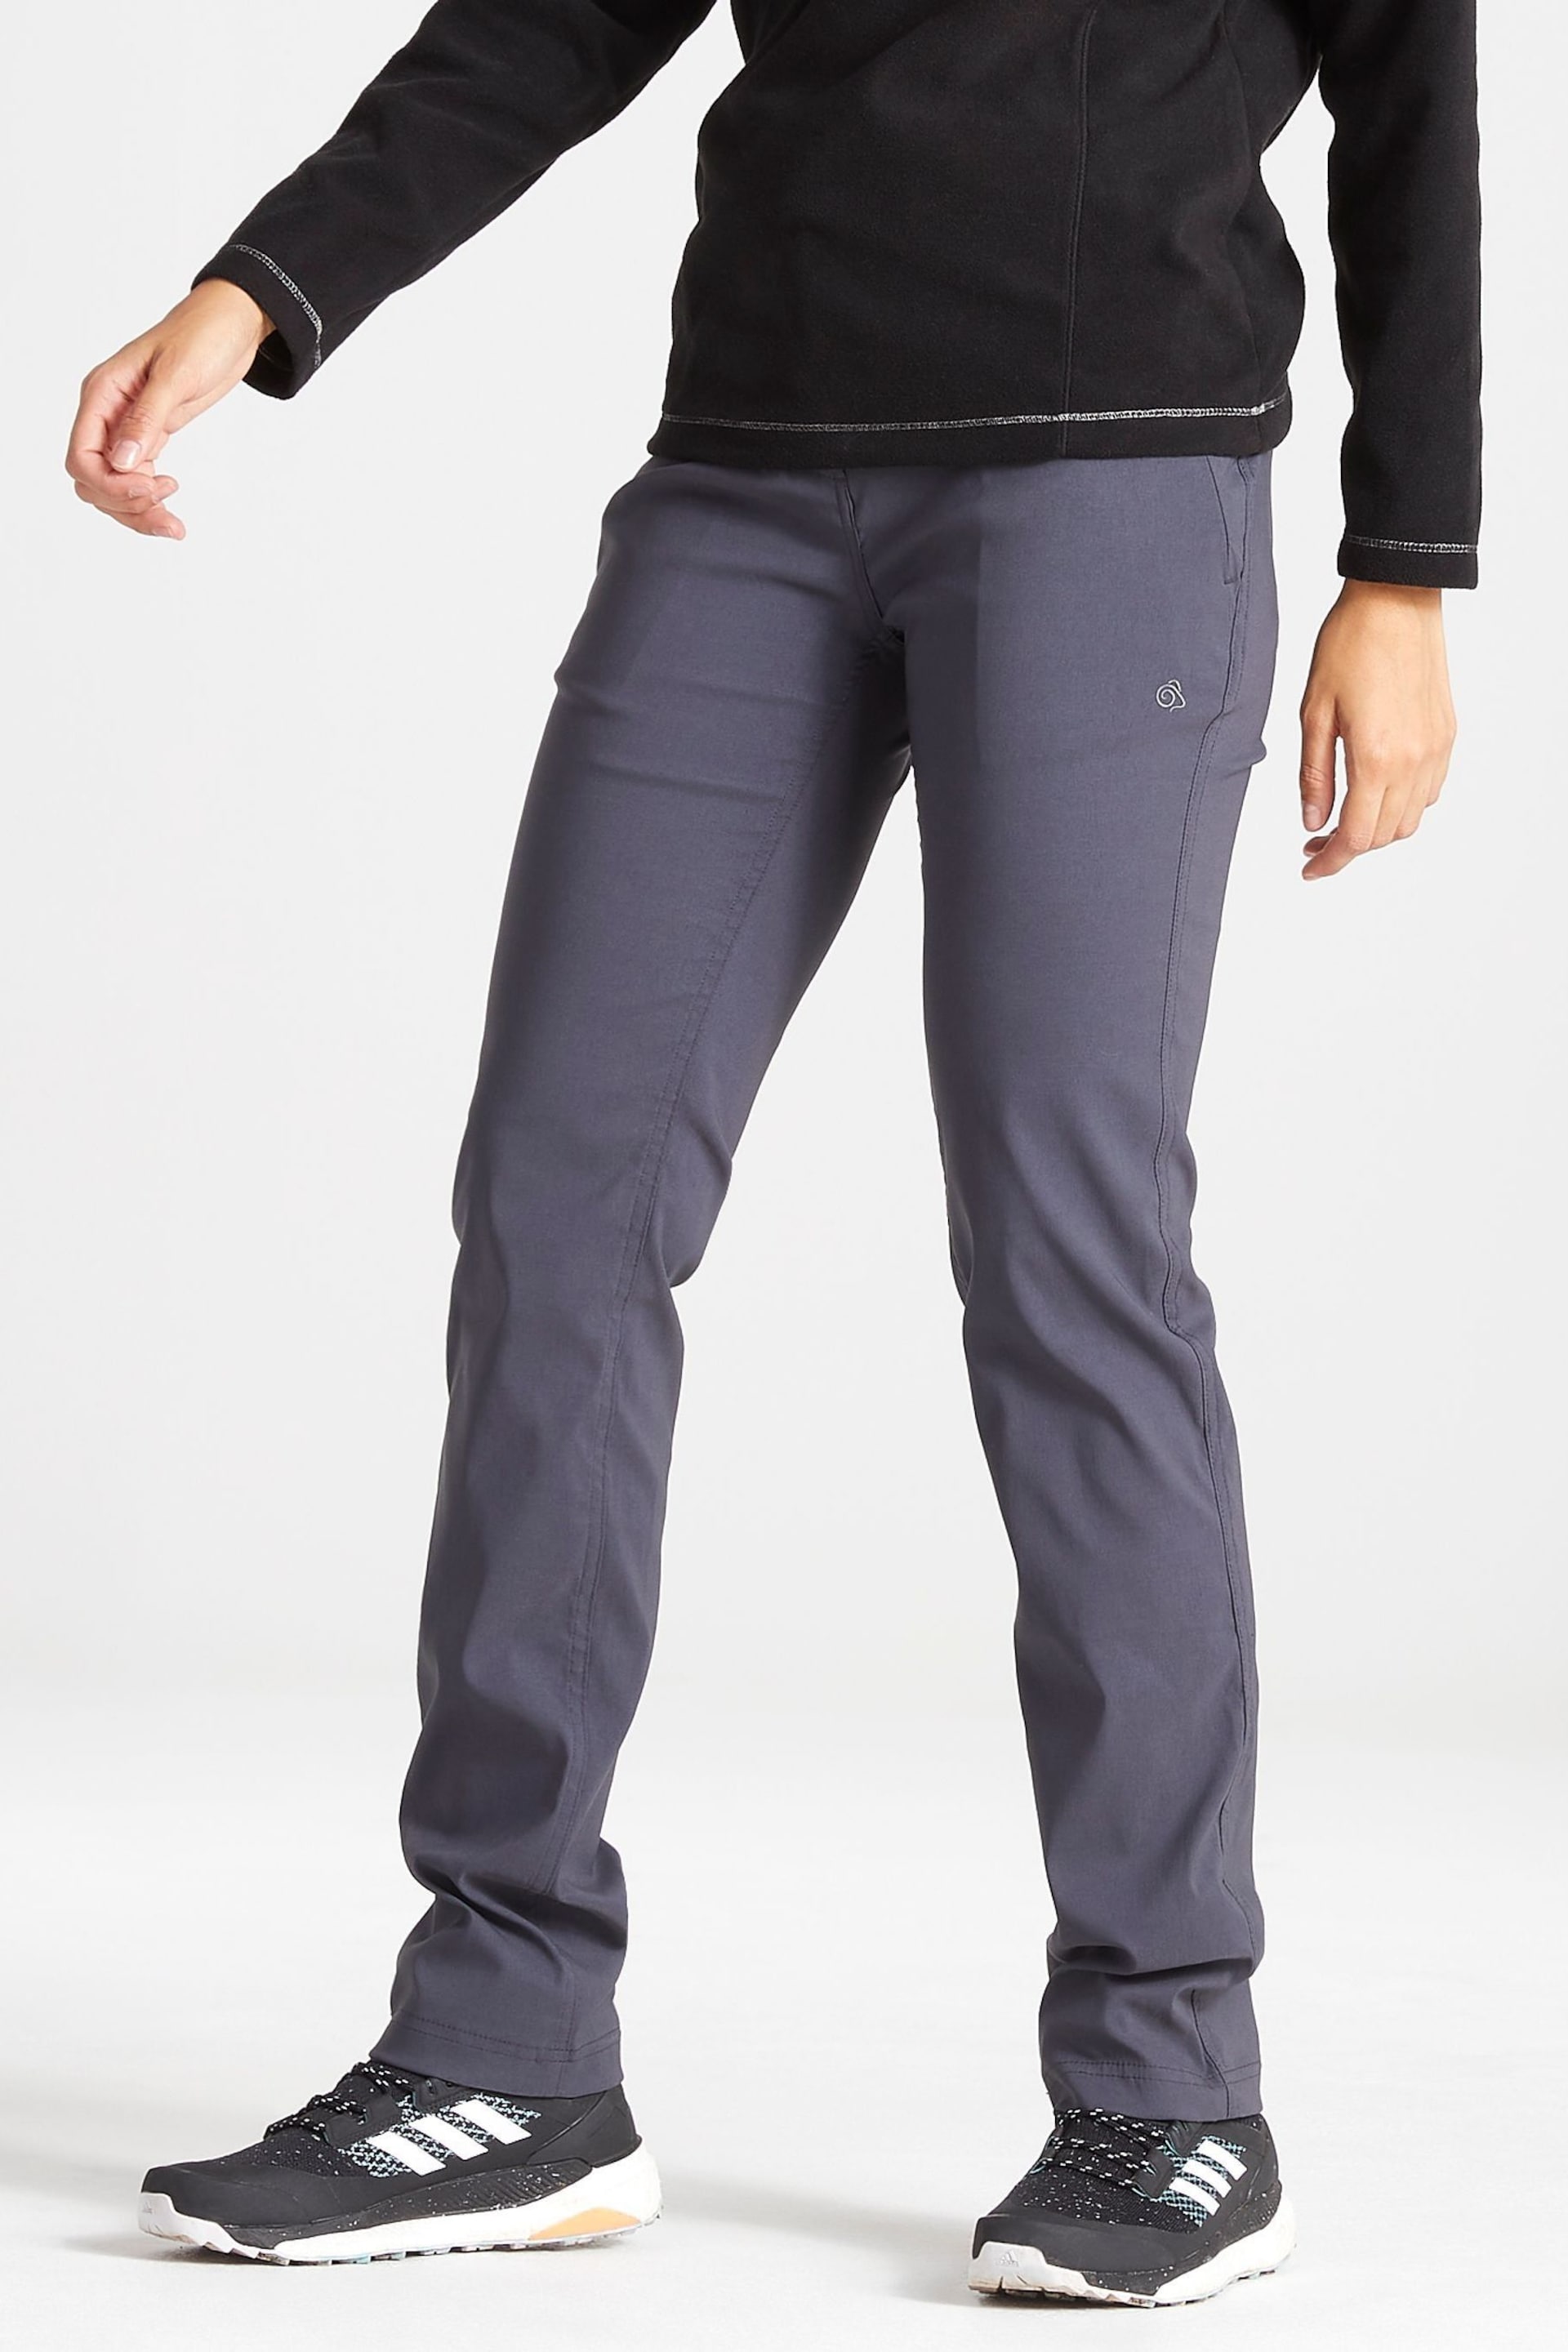 Craghoppers Grey Kiwi Pro Trousers - Image 1 of 5